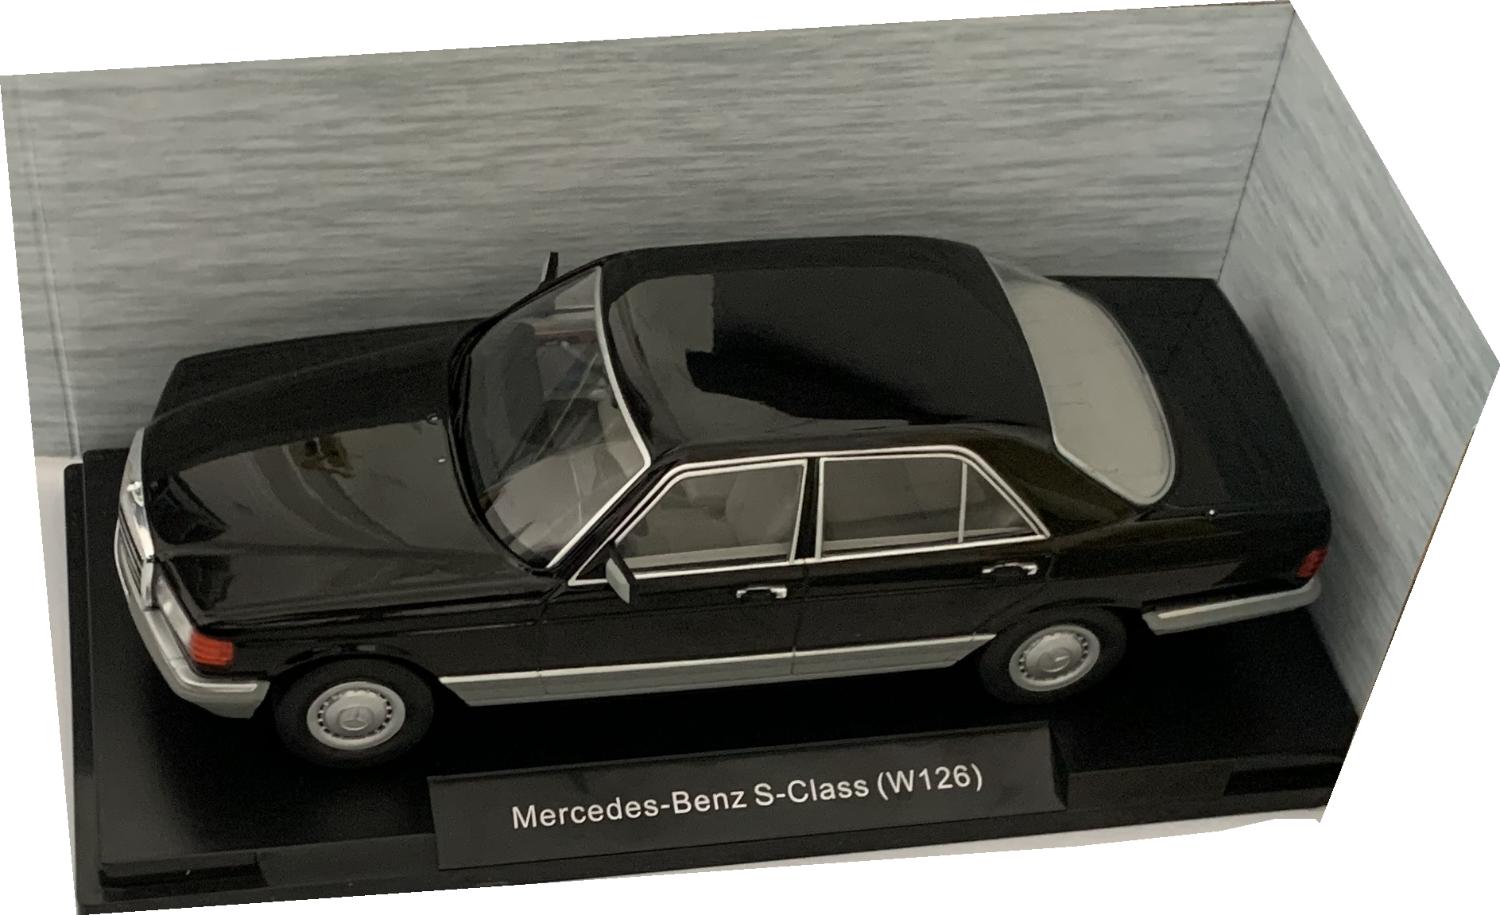 An excellent scale model of the Mercedes Benz S Class with high level of detail throughout, all authentically recreated.